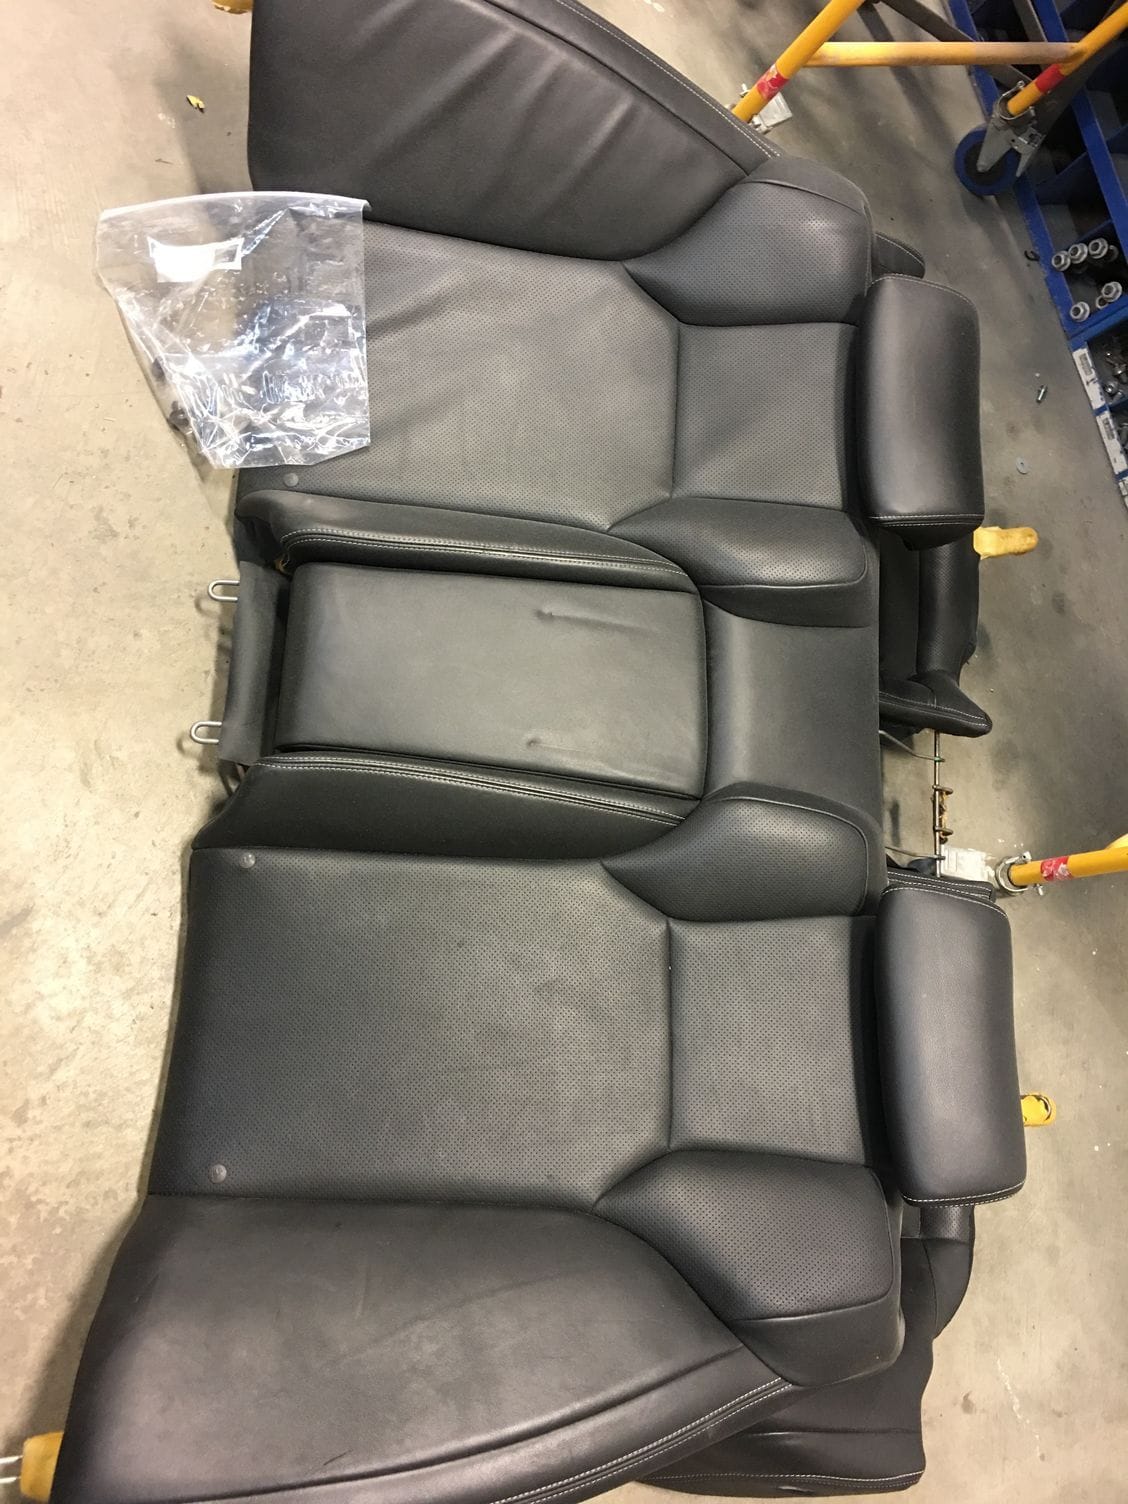 Interior/Upholstery - Black Leather White stitching Neiman Marcus Edition F logo Seat Set - Used - 2008 to 2014 Lexus IS F - Cranberry Twp, PA 16066, United States